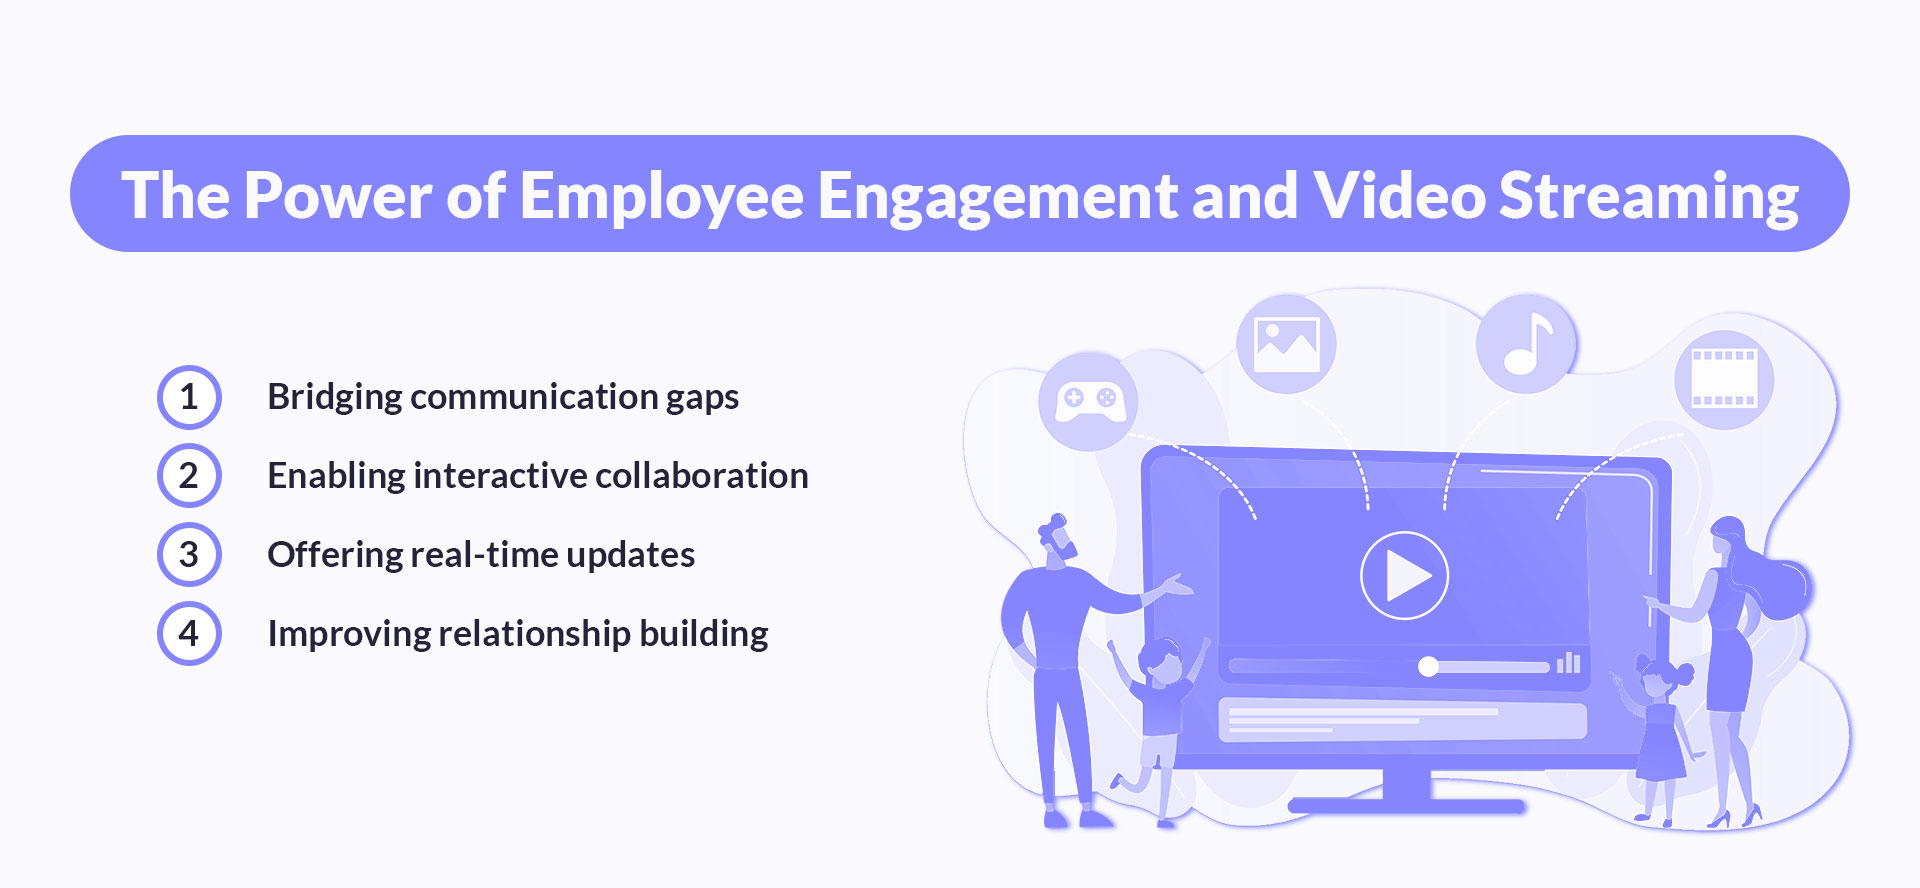 Employee engagement and video streaming